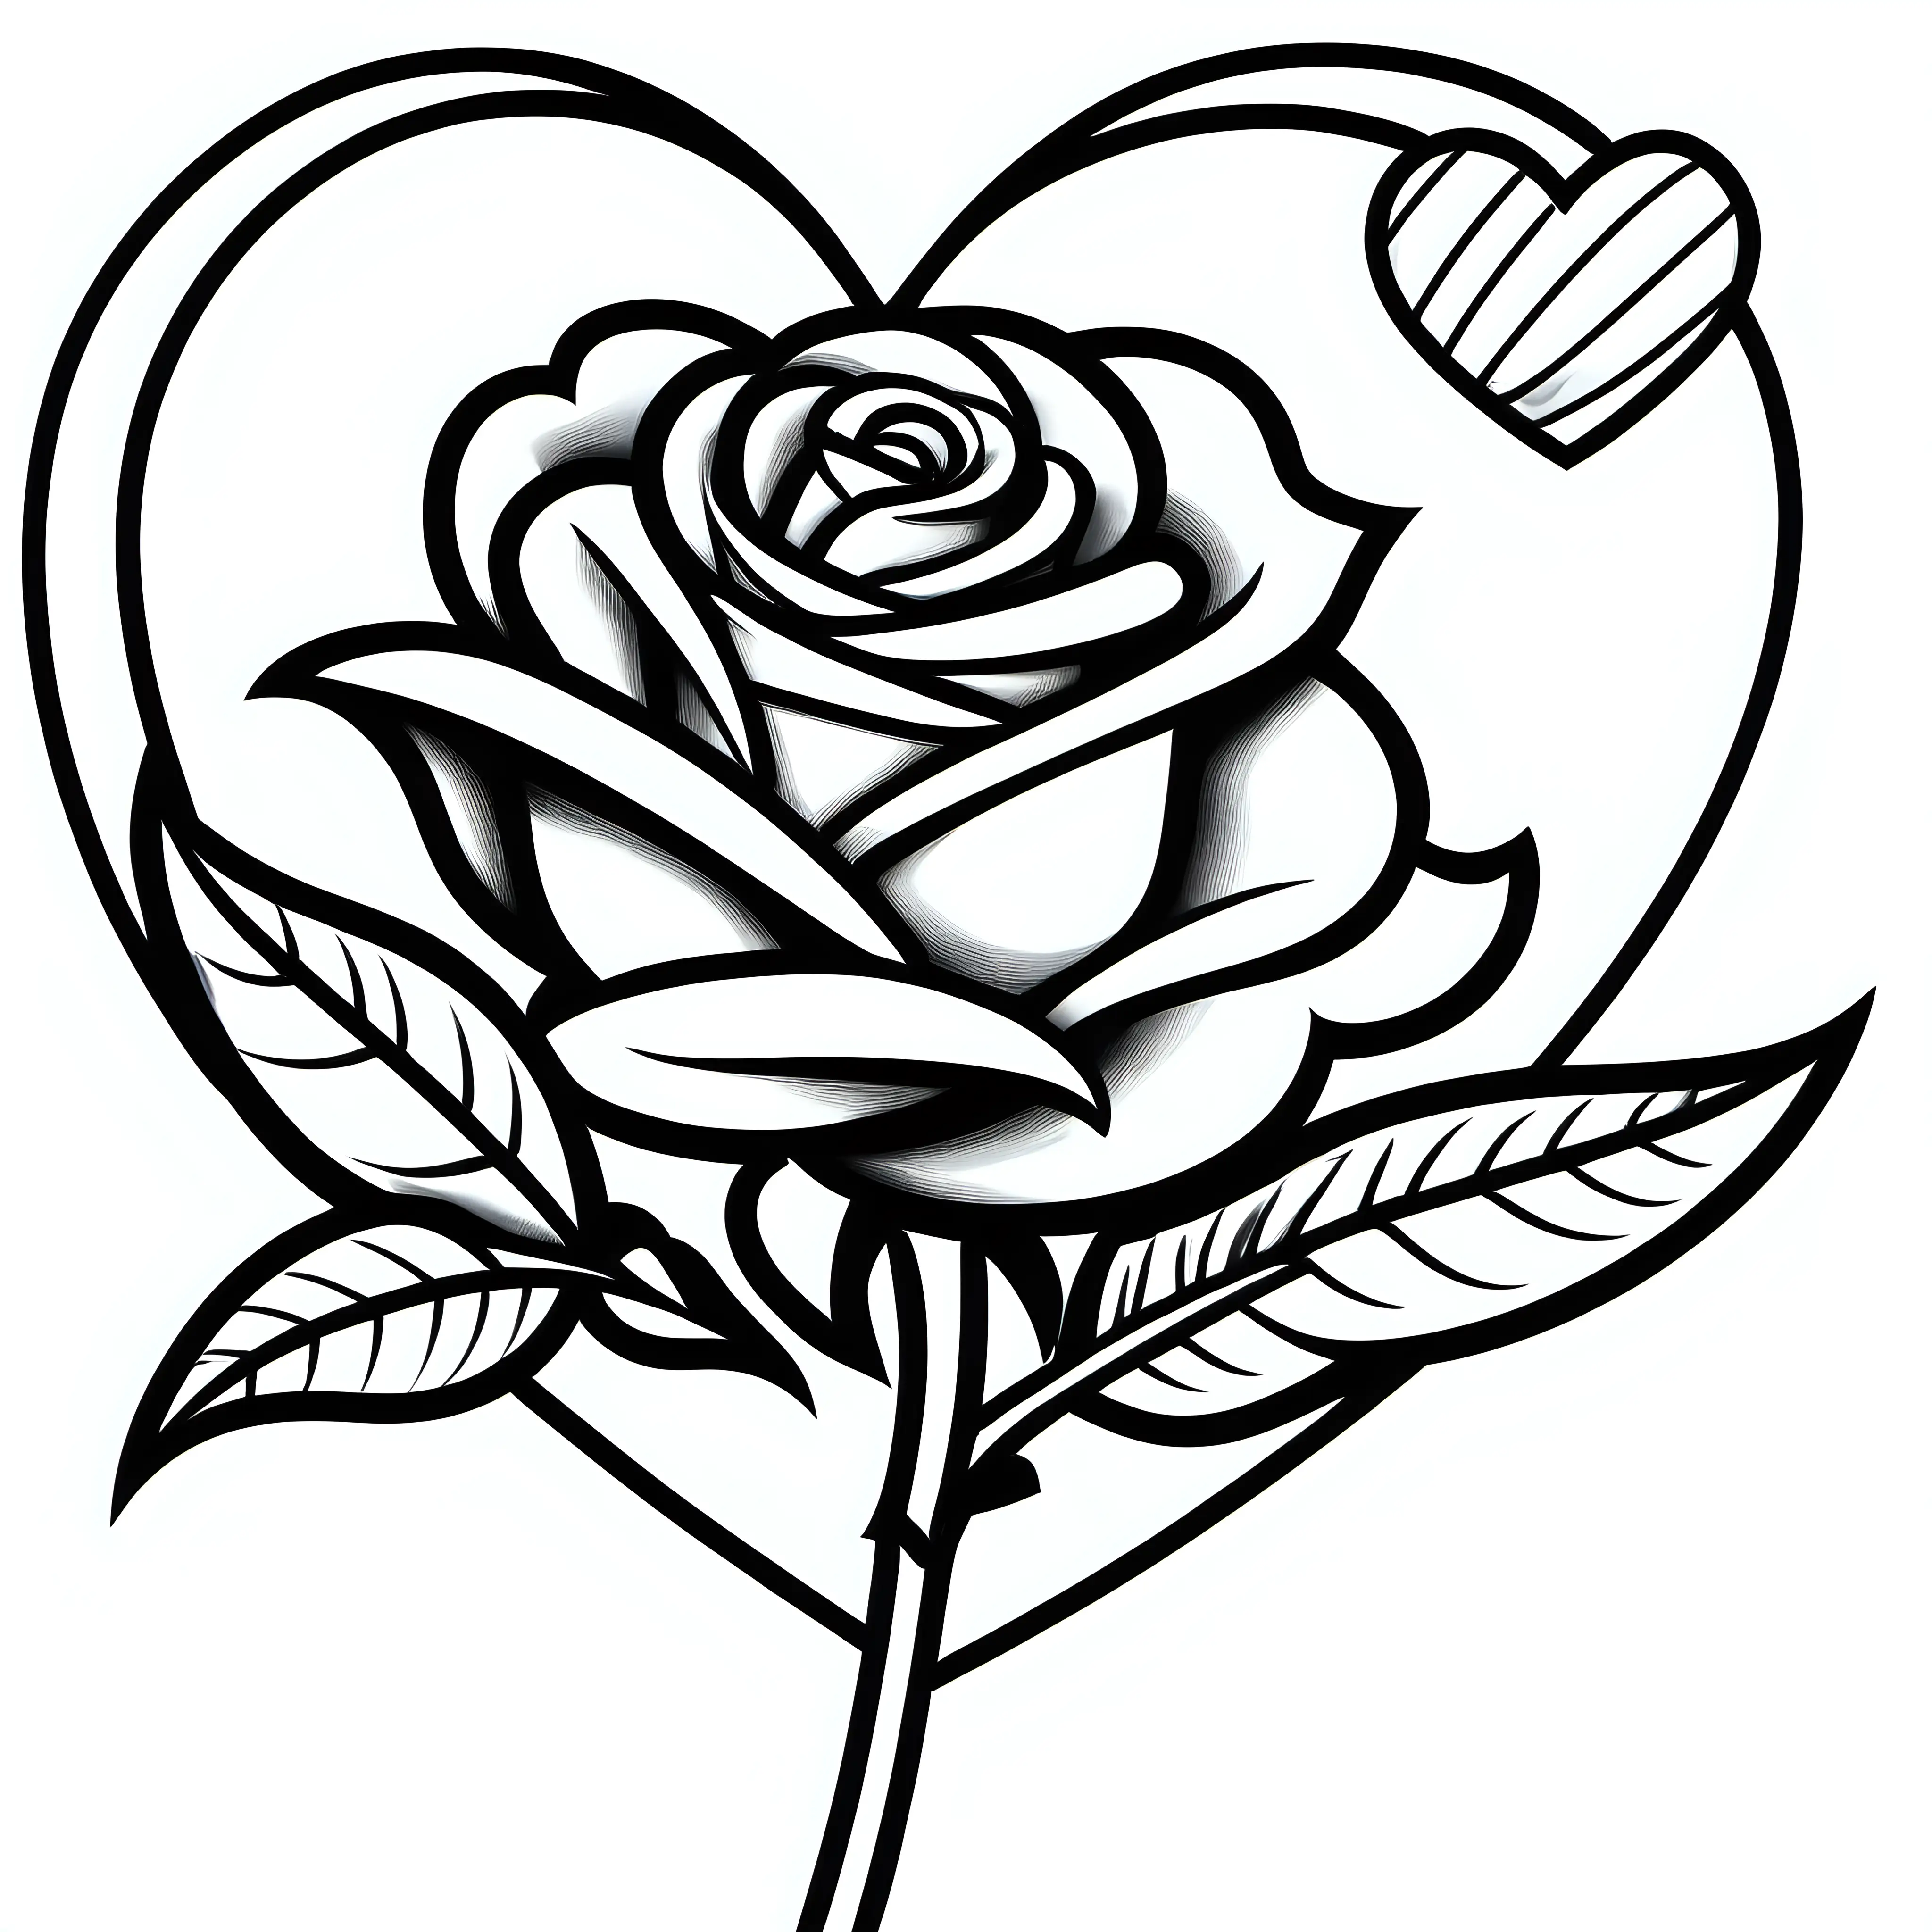 Valentines Day Coloring Page Cartoon Rose and Heart | MUSE AI